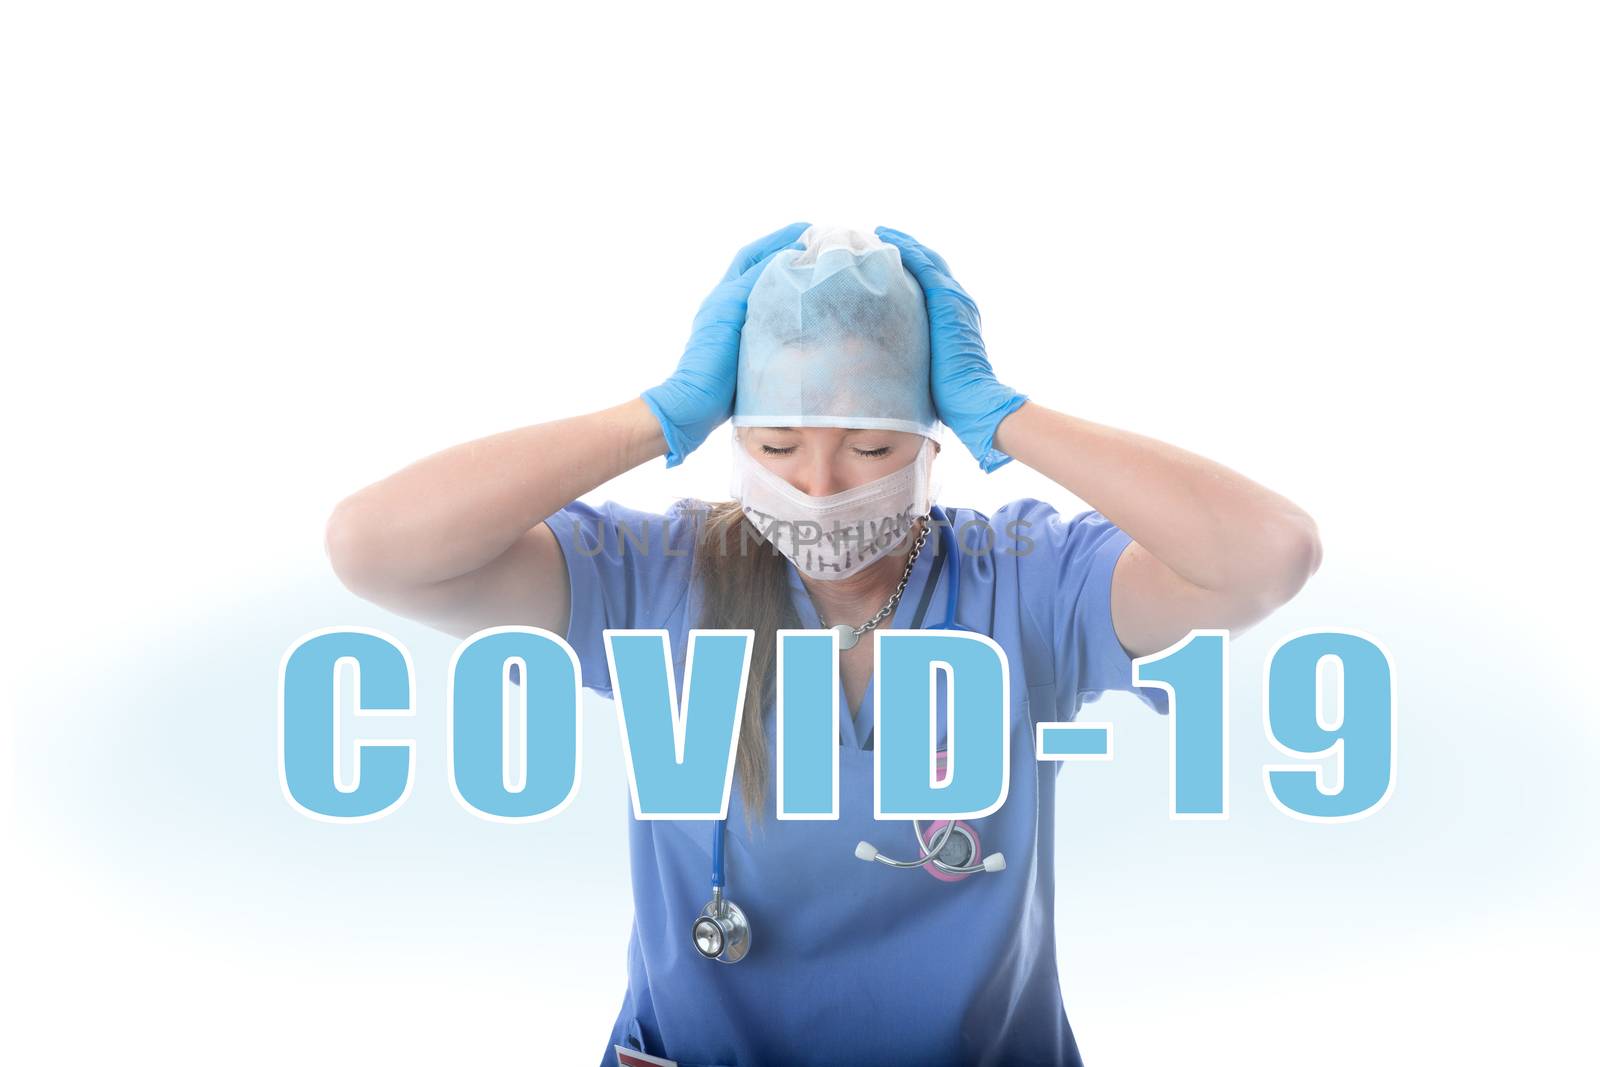 Hospital nurse overwhelmed and stressed during COVID-19 influenza virus pandemic